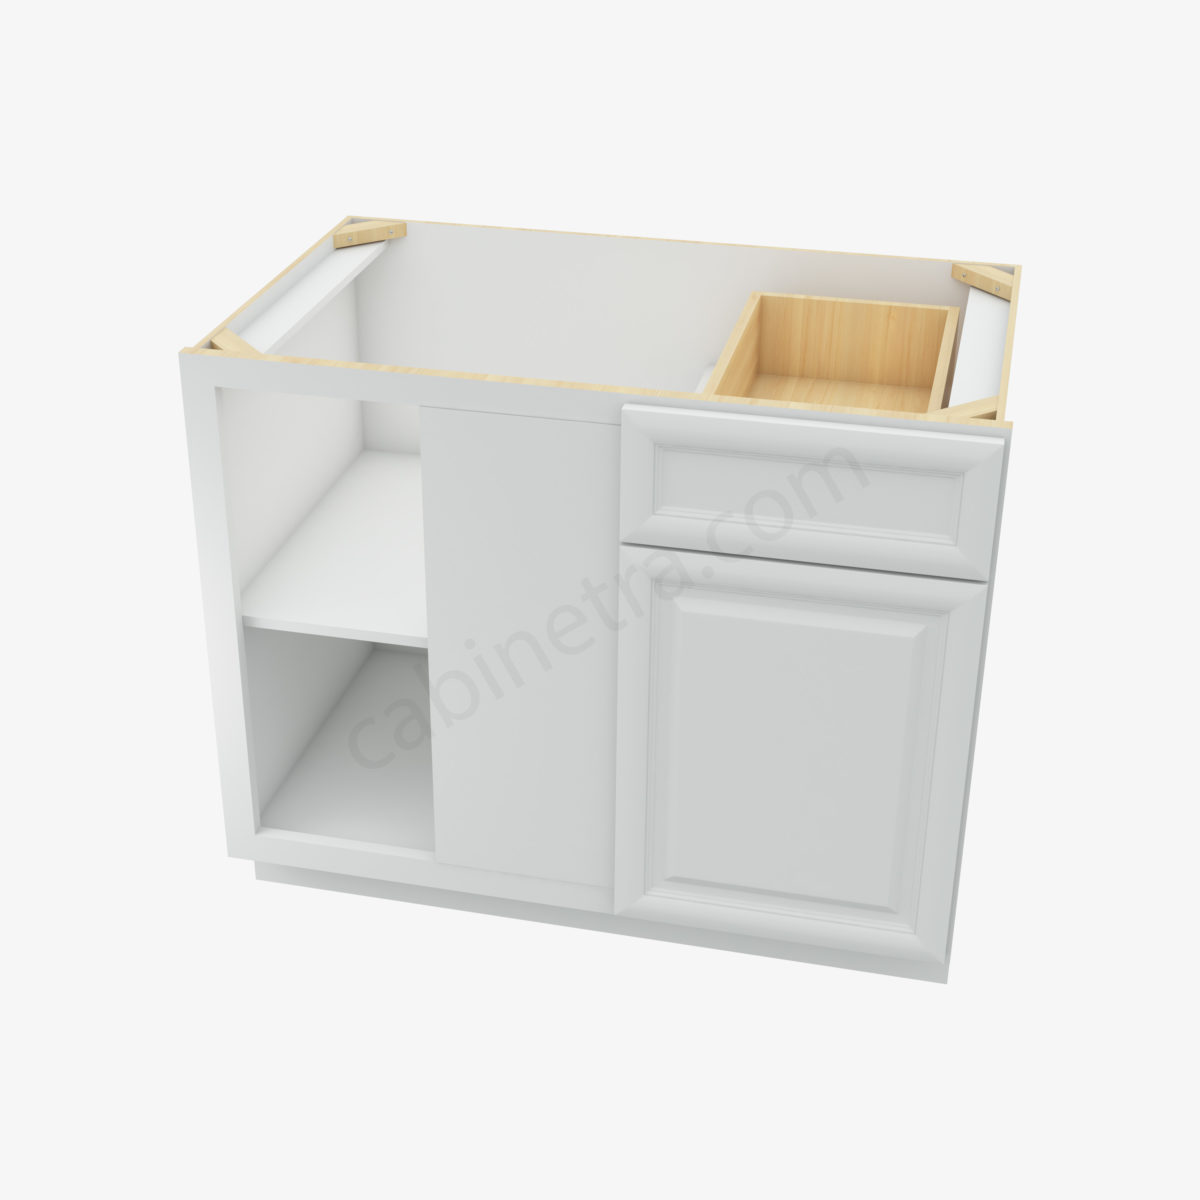 KW BBLC42 45 39W 3  Forevermark K White Cabinetra scaled